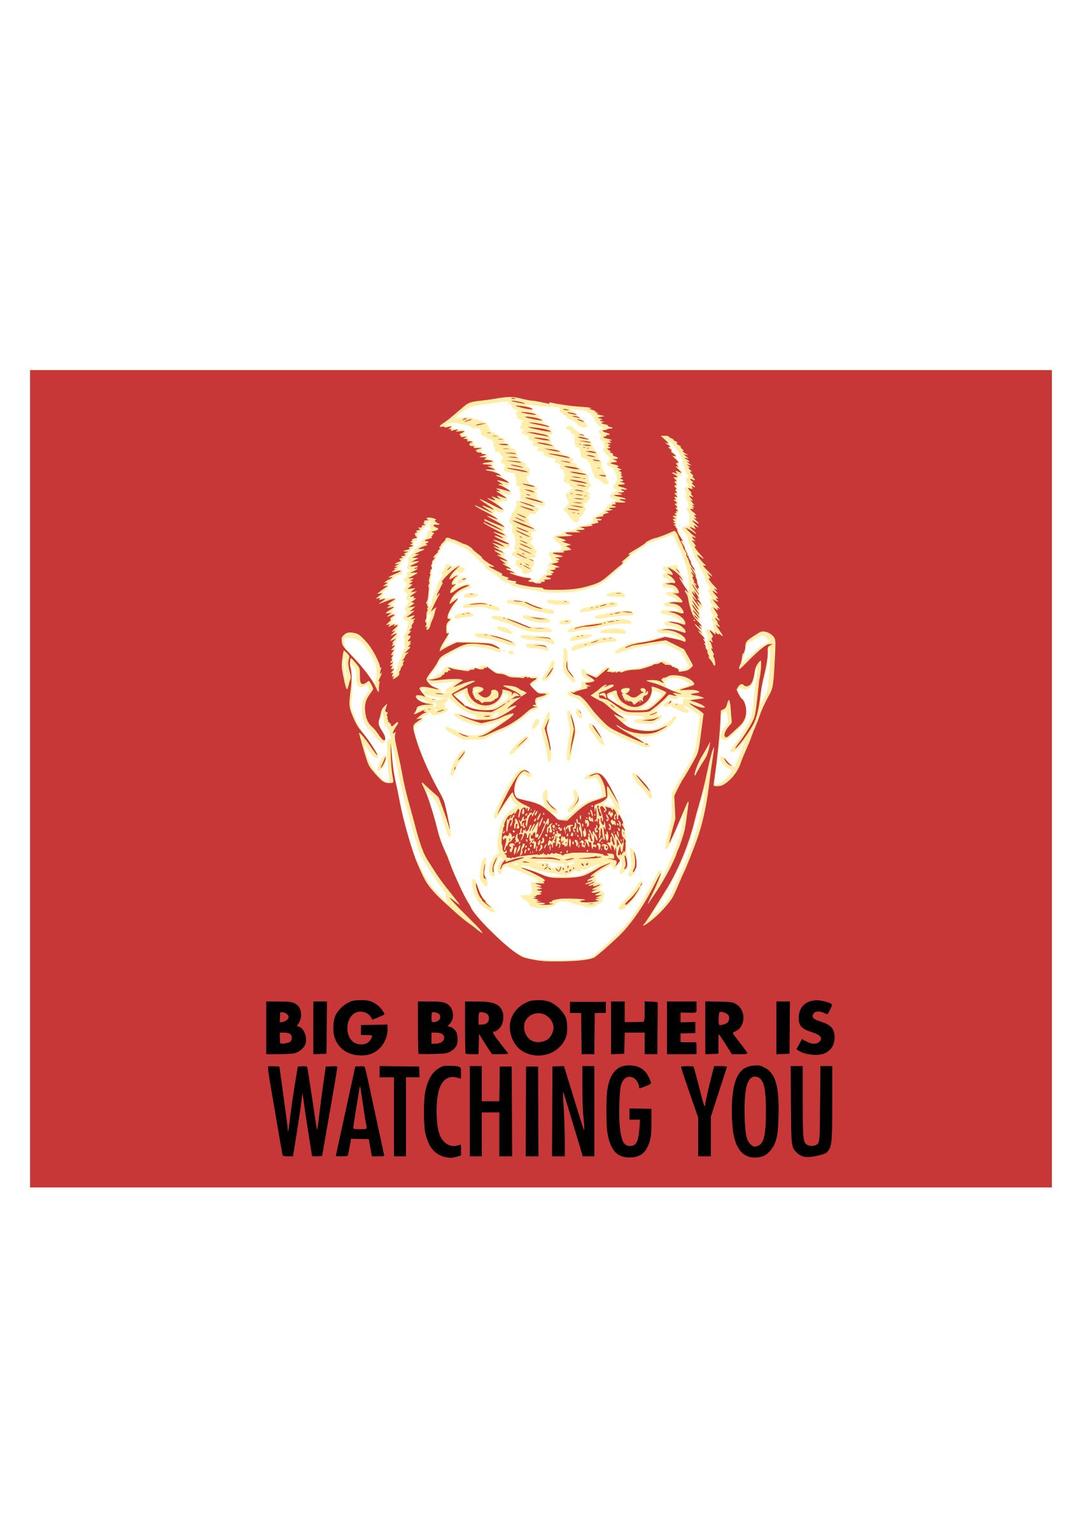 Big Brother is watching you png transparent